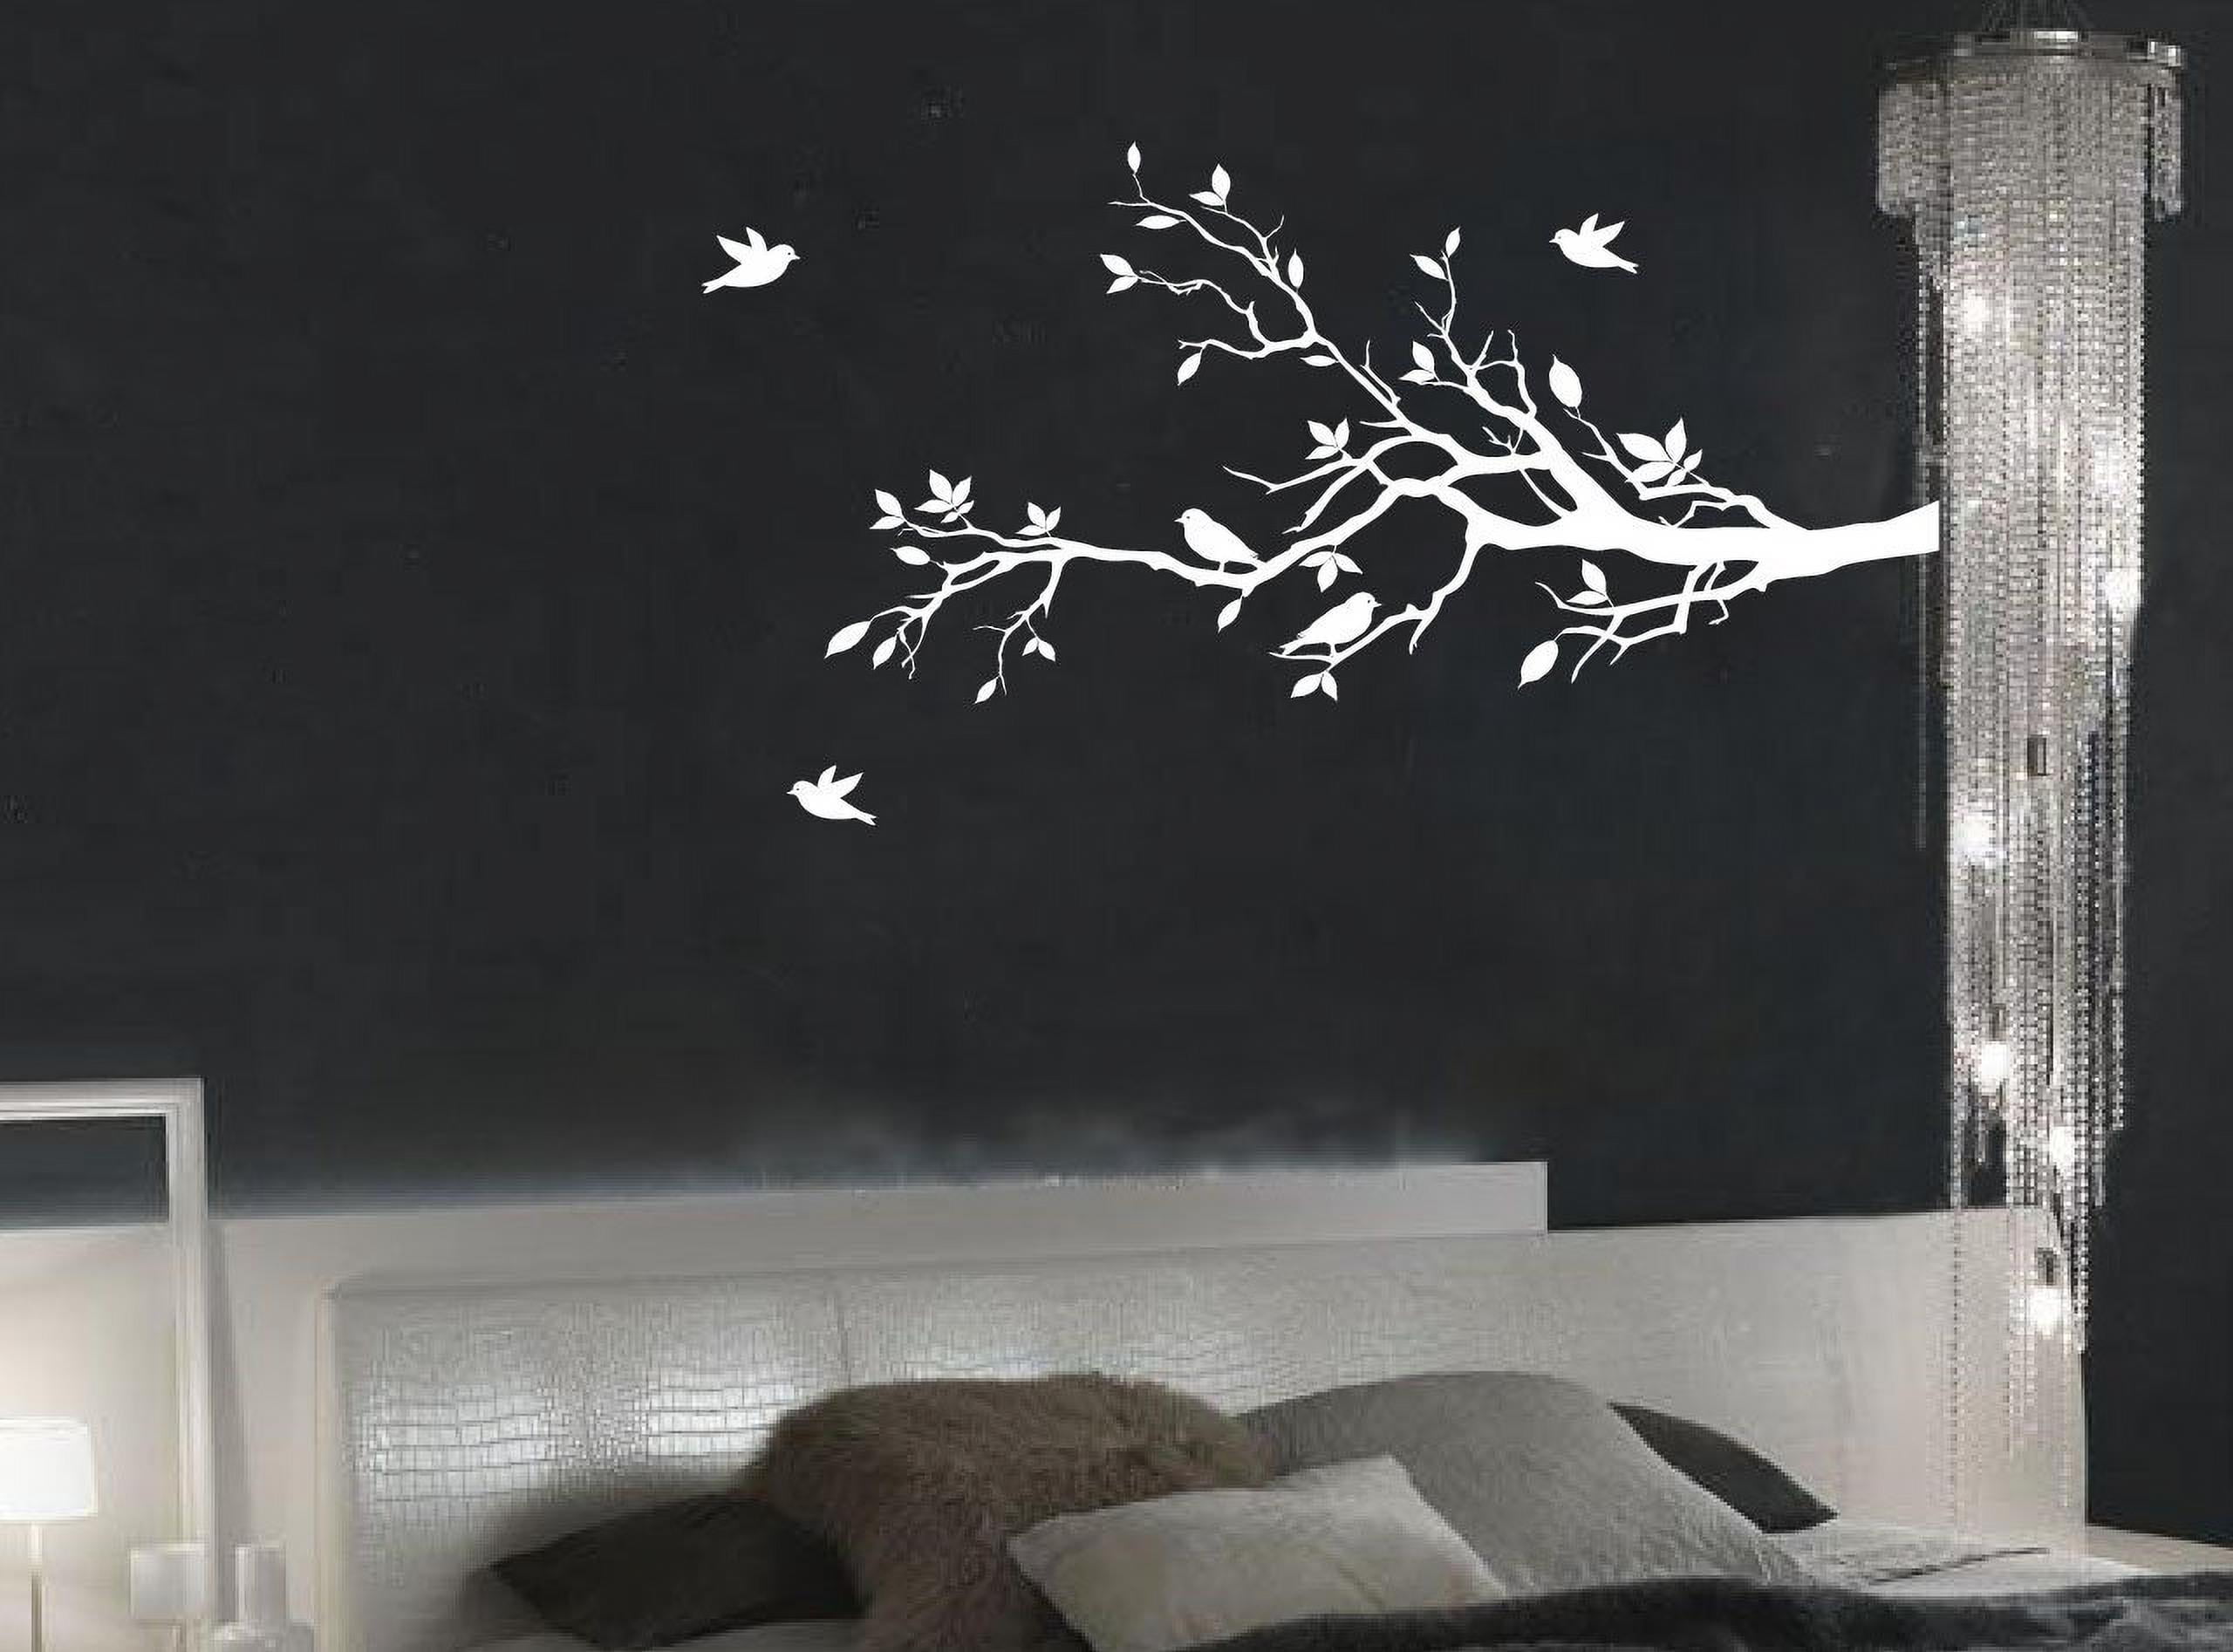 Star Wars Bedroom Wall Sticker Solid Logo Decal Transfers Easily No Background 